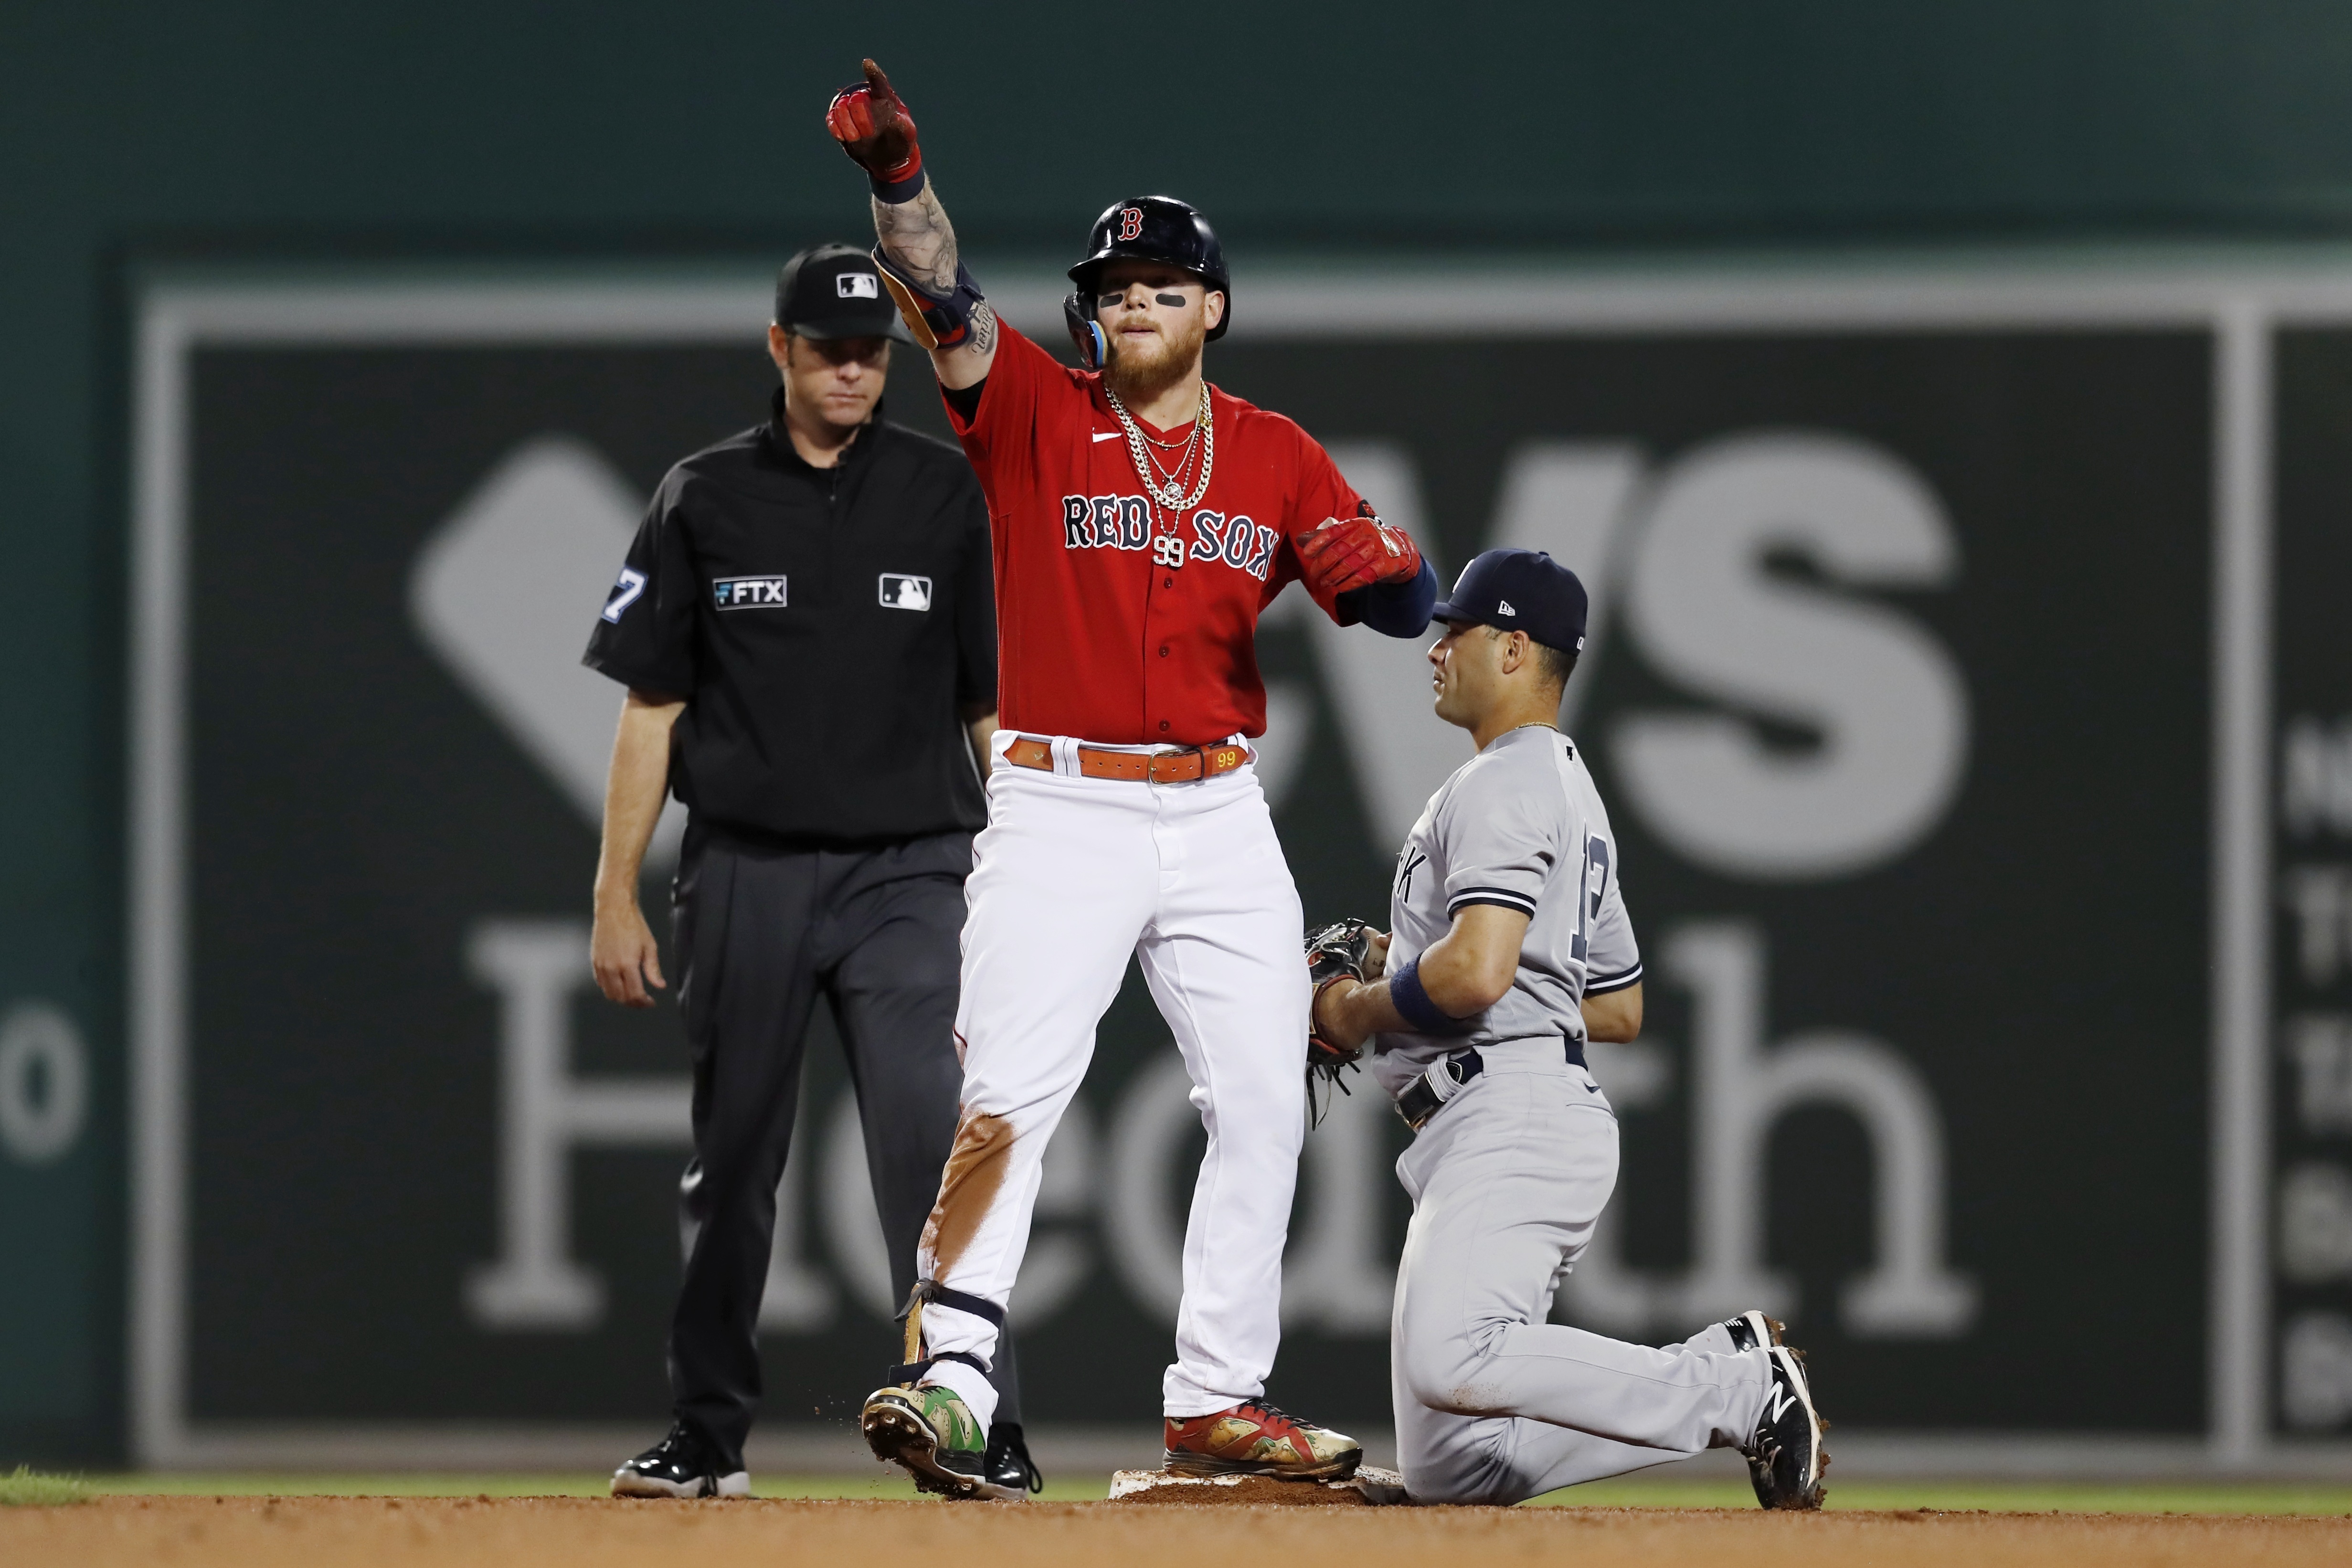 Where Do The Red Sox Stand In The Boston Sports Hierarchy? - Over